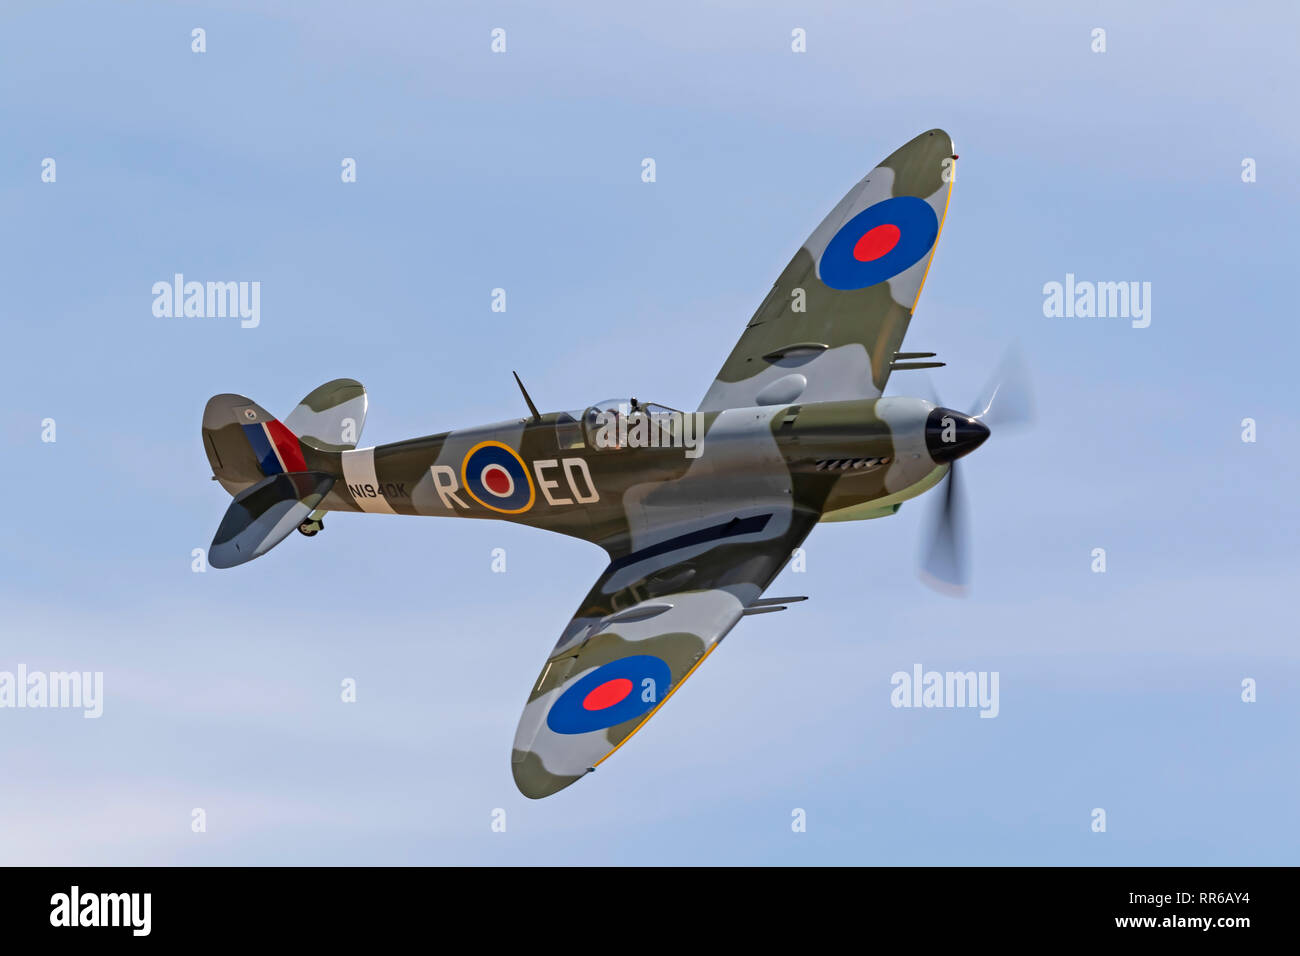 Airplane WWII Spitfire vintage aircraft flying Stock Photo